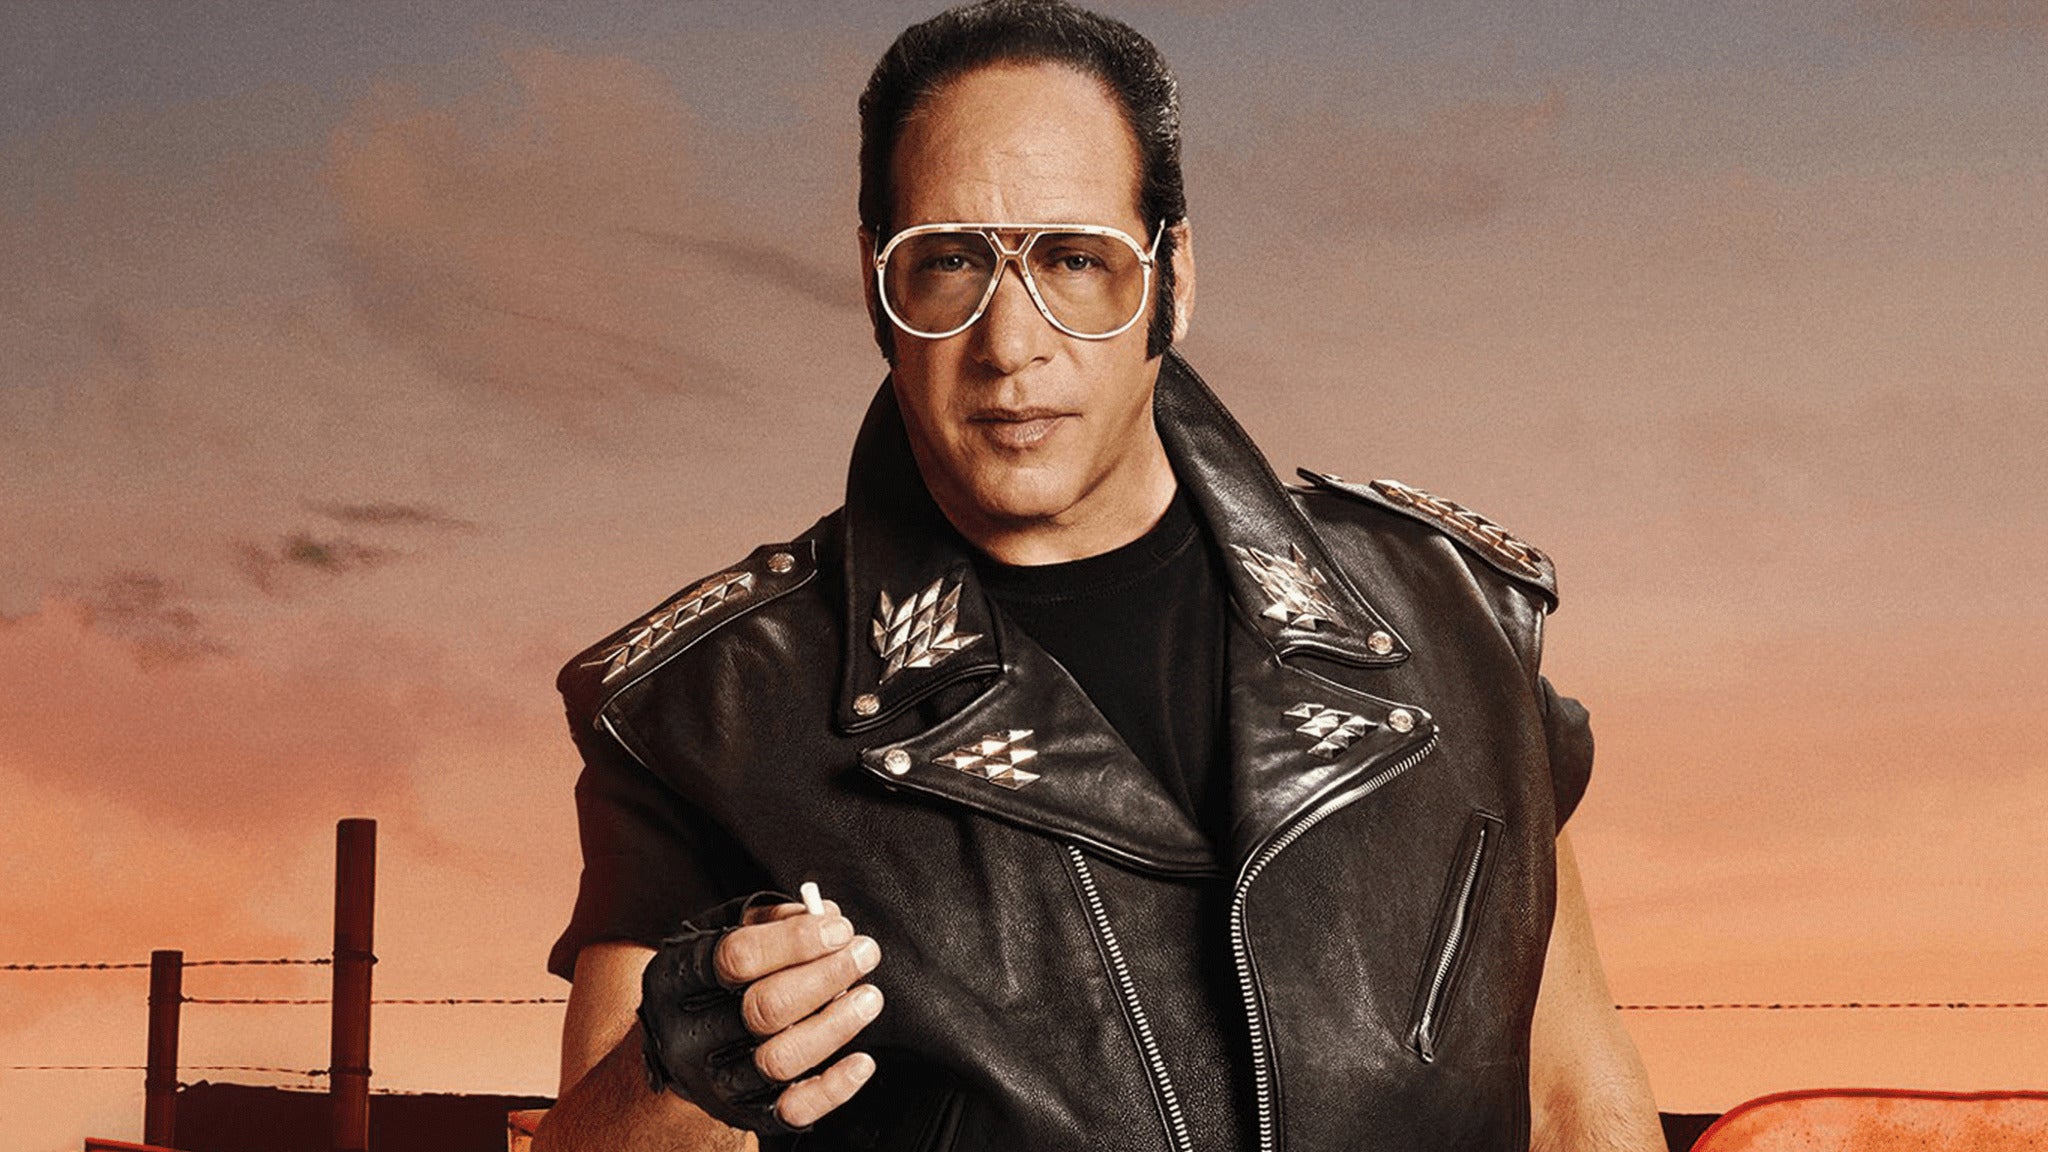 Andrew Dice Clay at The Paramount